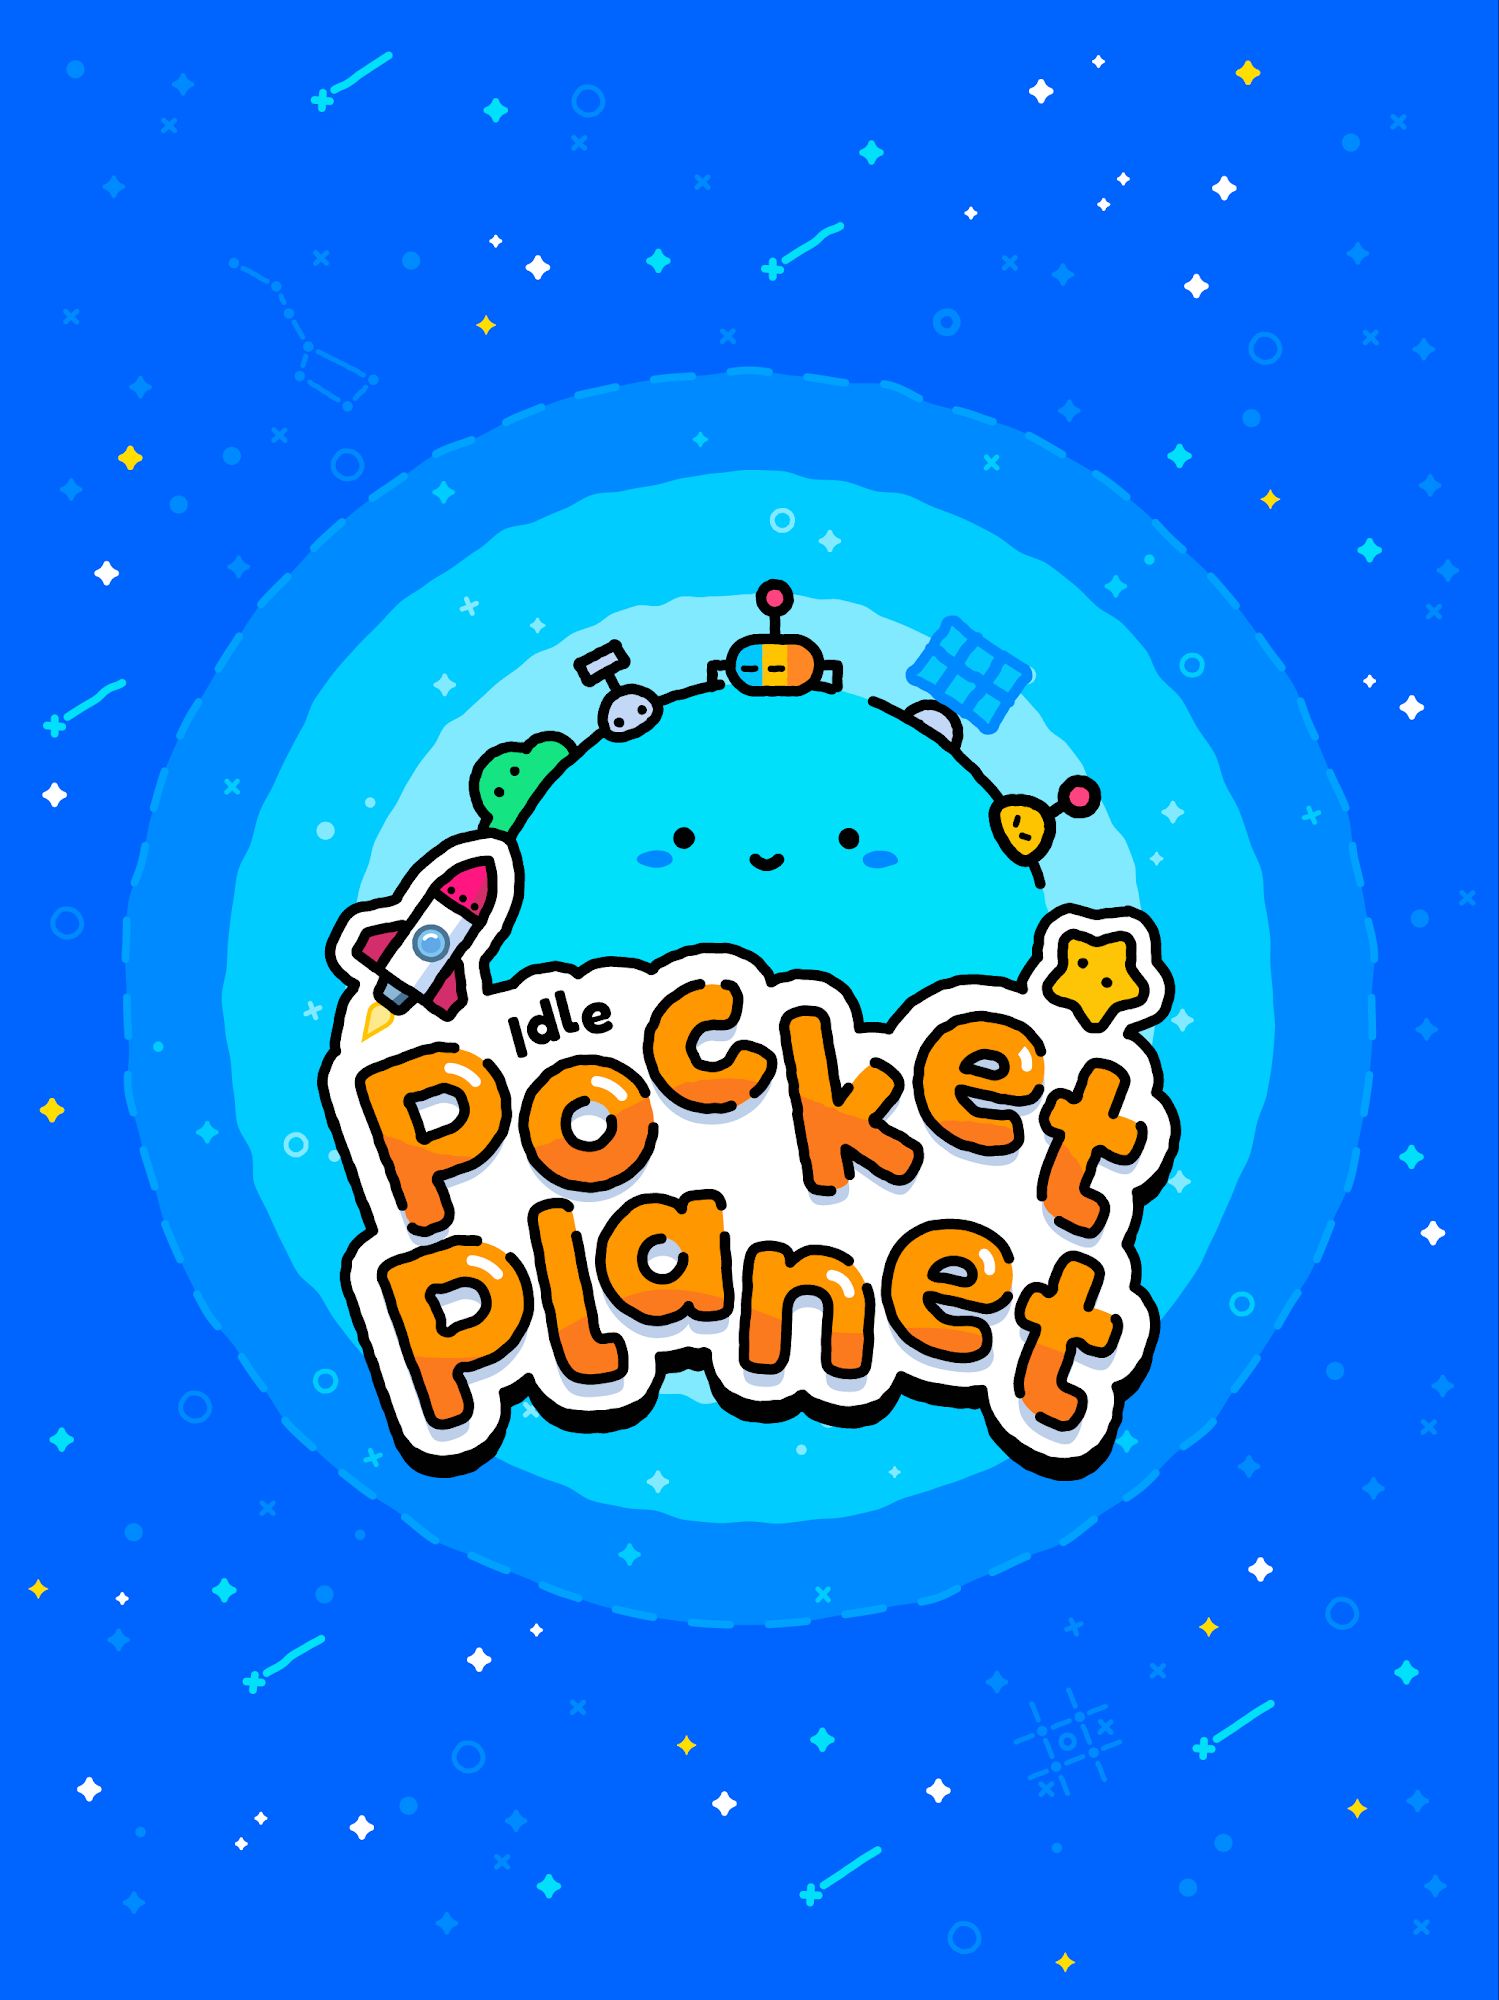 Scarica Idle Pocket Planet gratis per Android.